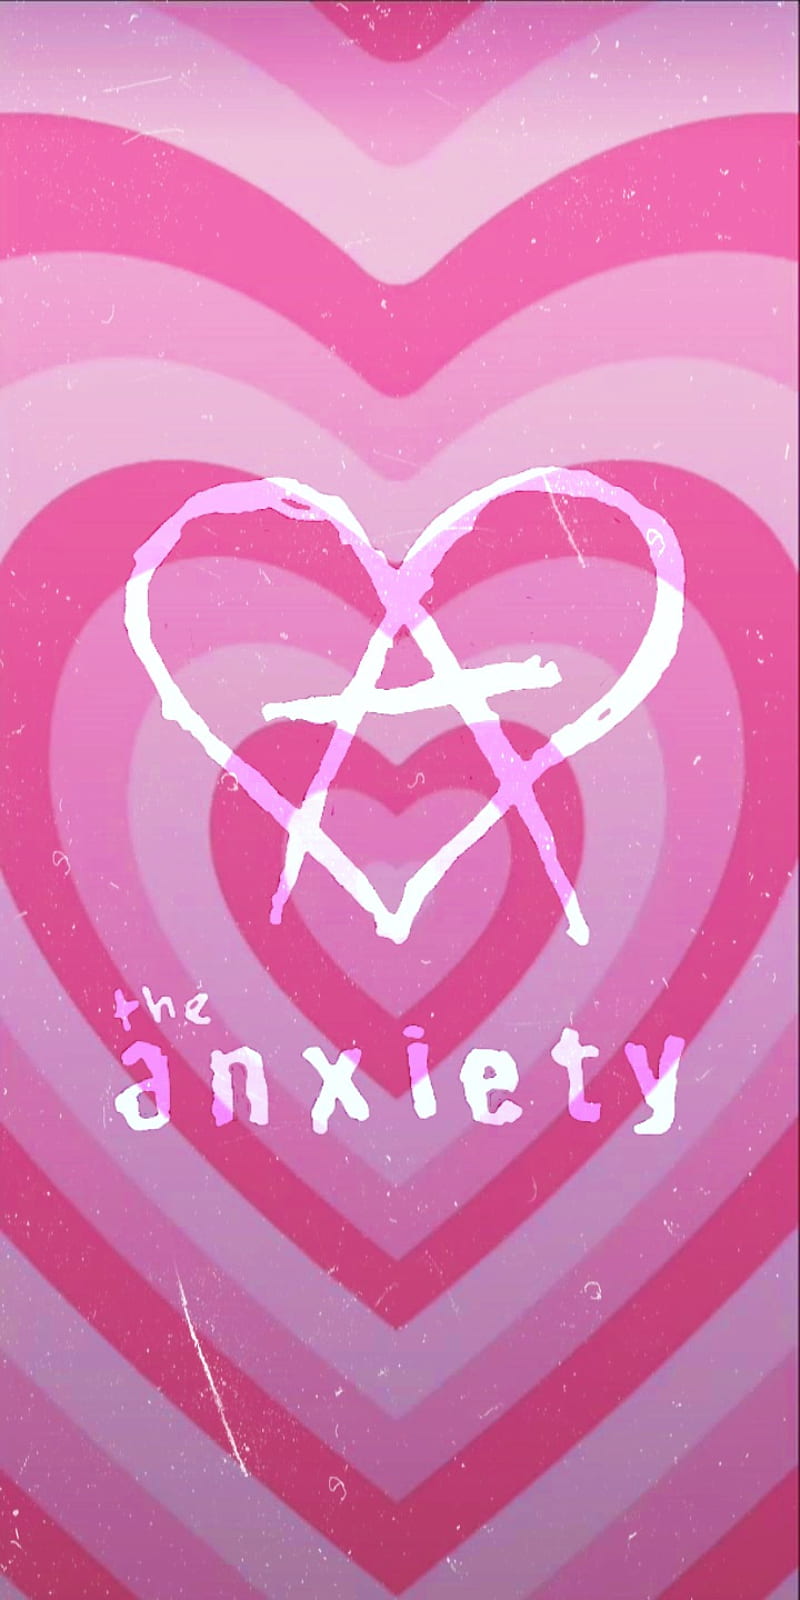 the anxiety logo, aesthetic, aesthetic pink heart, hearts, heart pattern, willow smith, pink aesthetic, pink heart, tyler cole, HD phone wallpaper